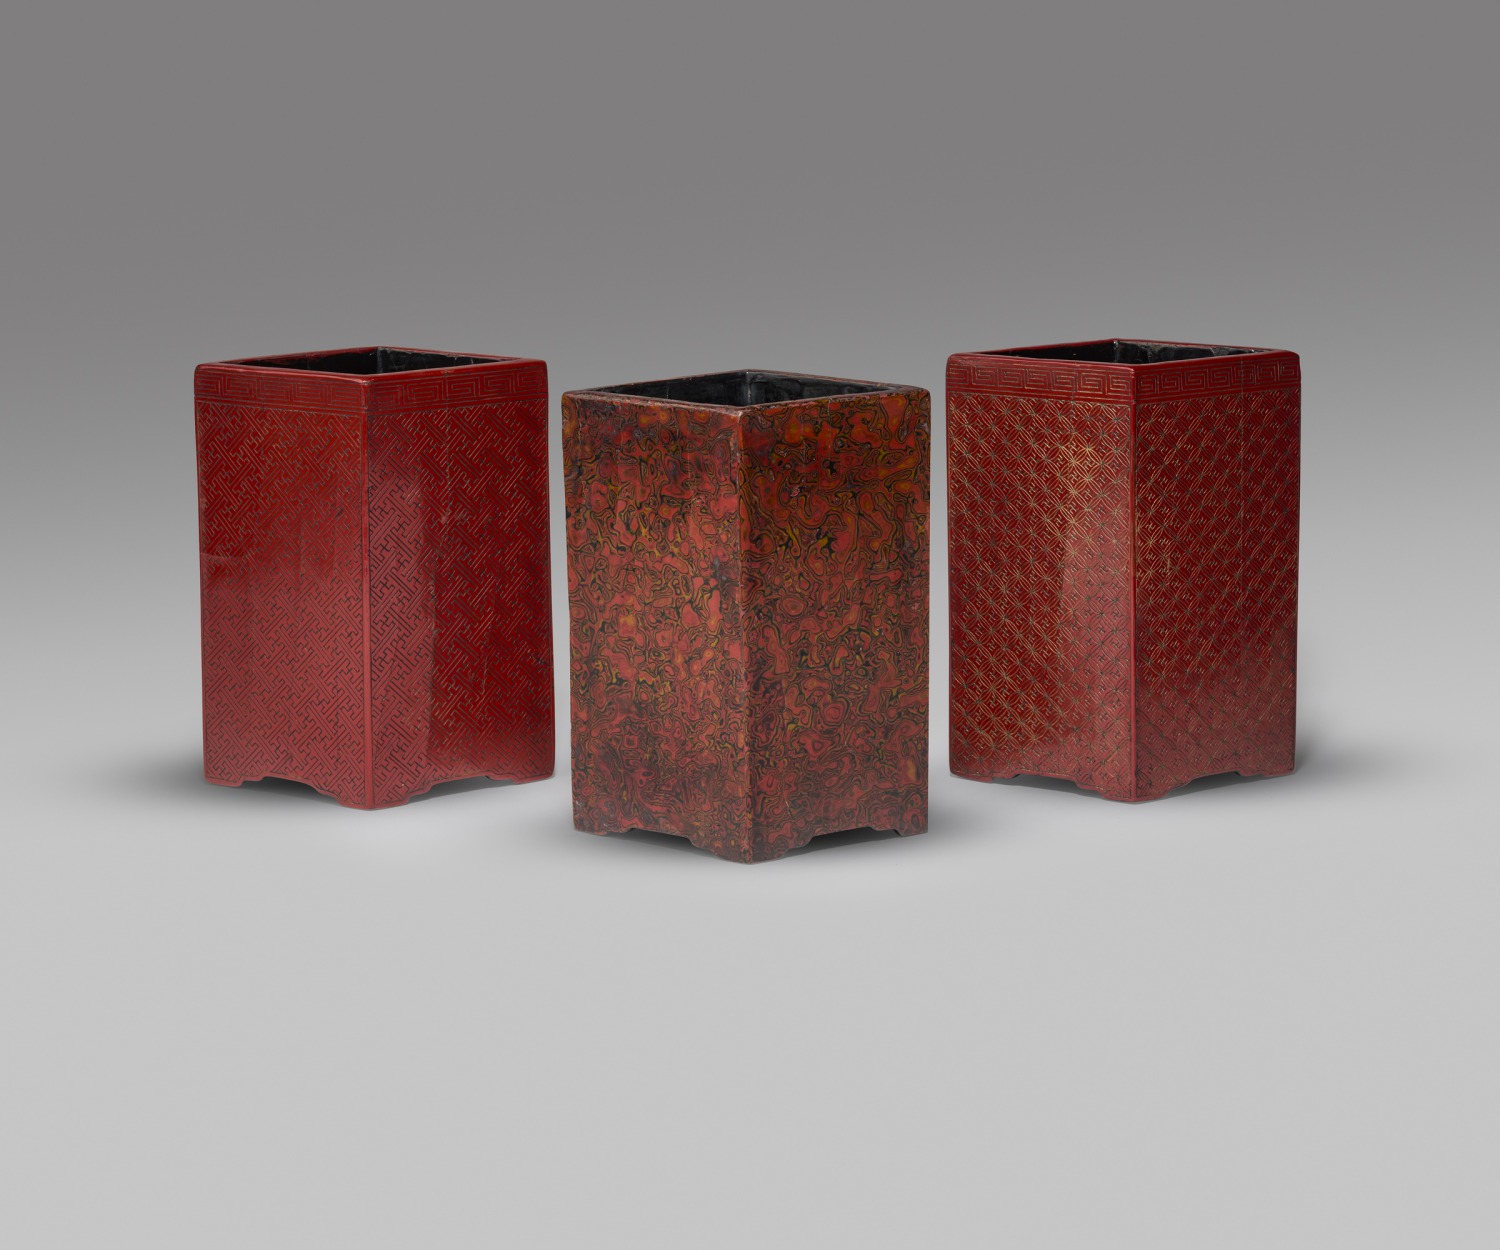 A GROUP OF THREE RHOMBIC OR DIAMOND SHAPED LACQUER BRUSH POTS